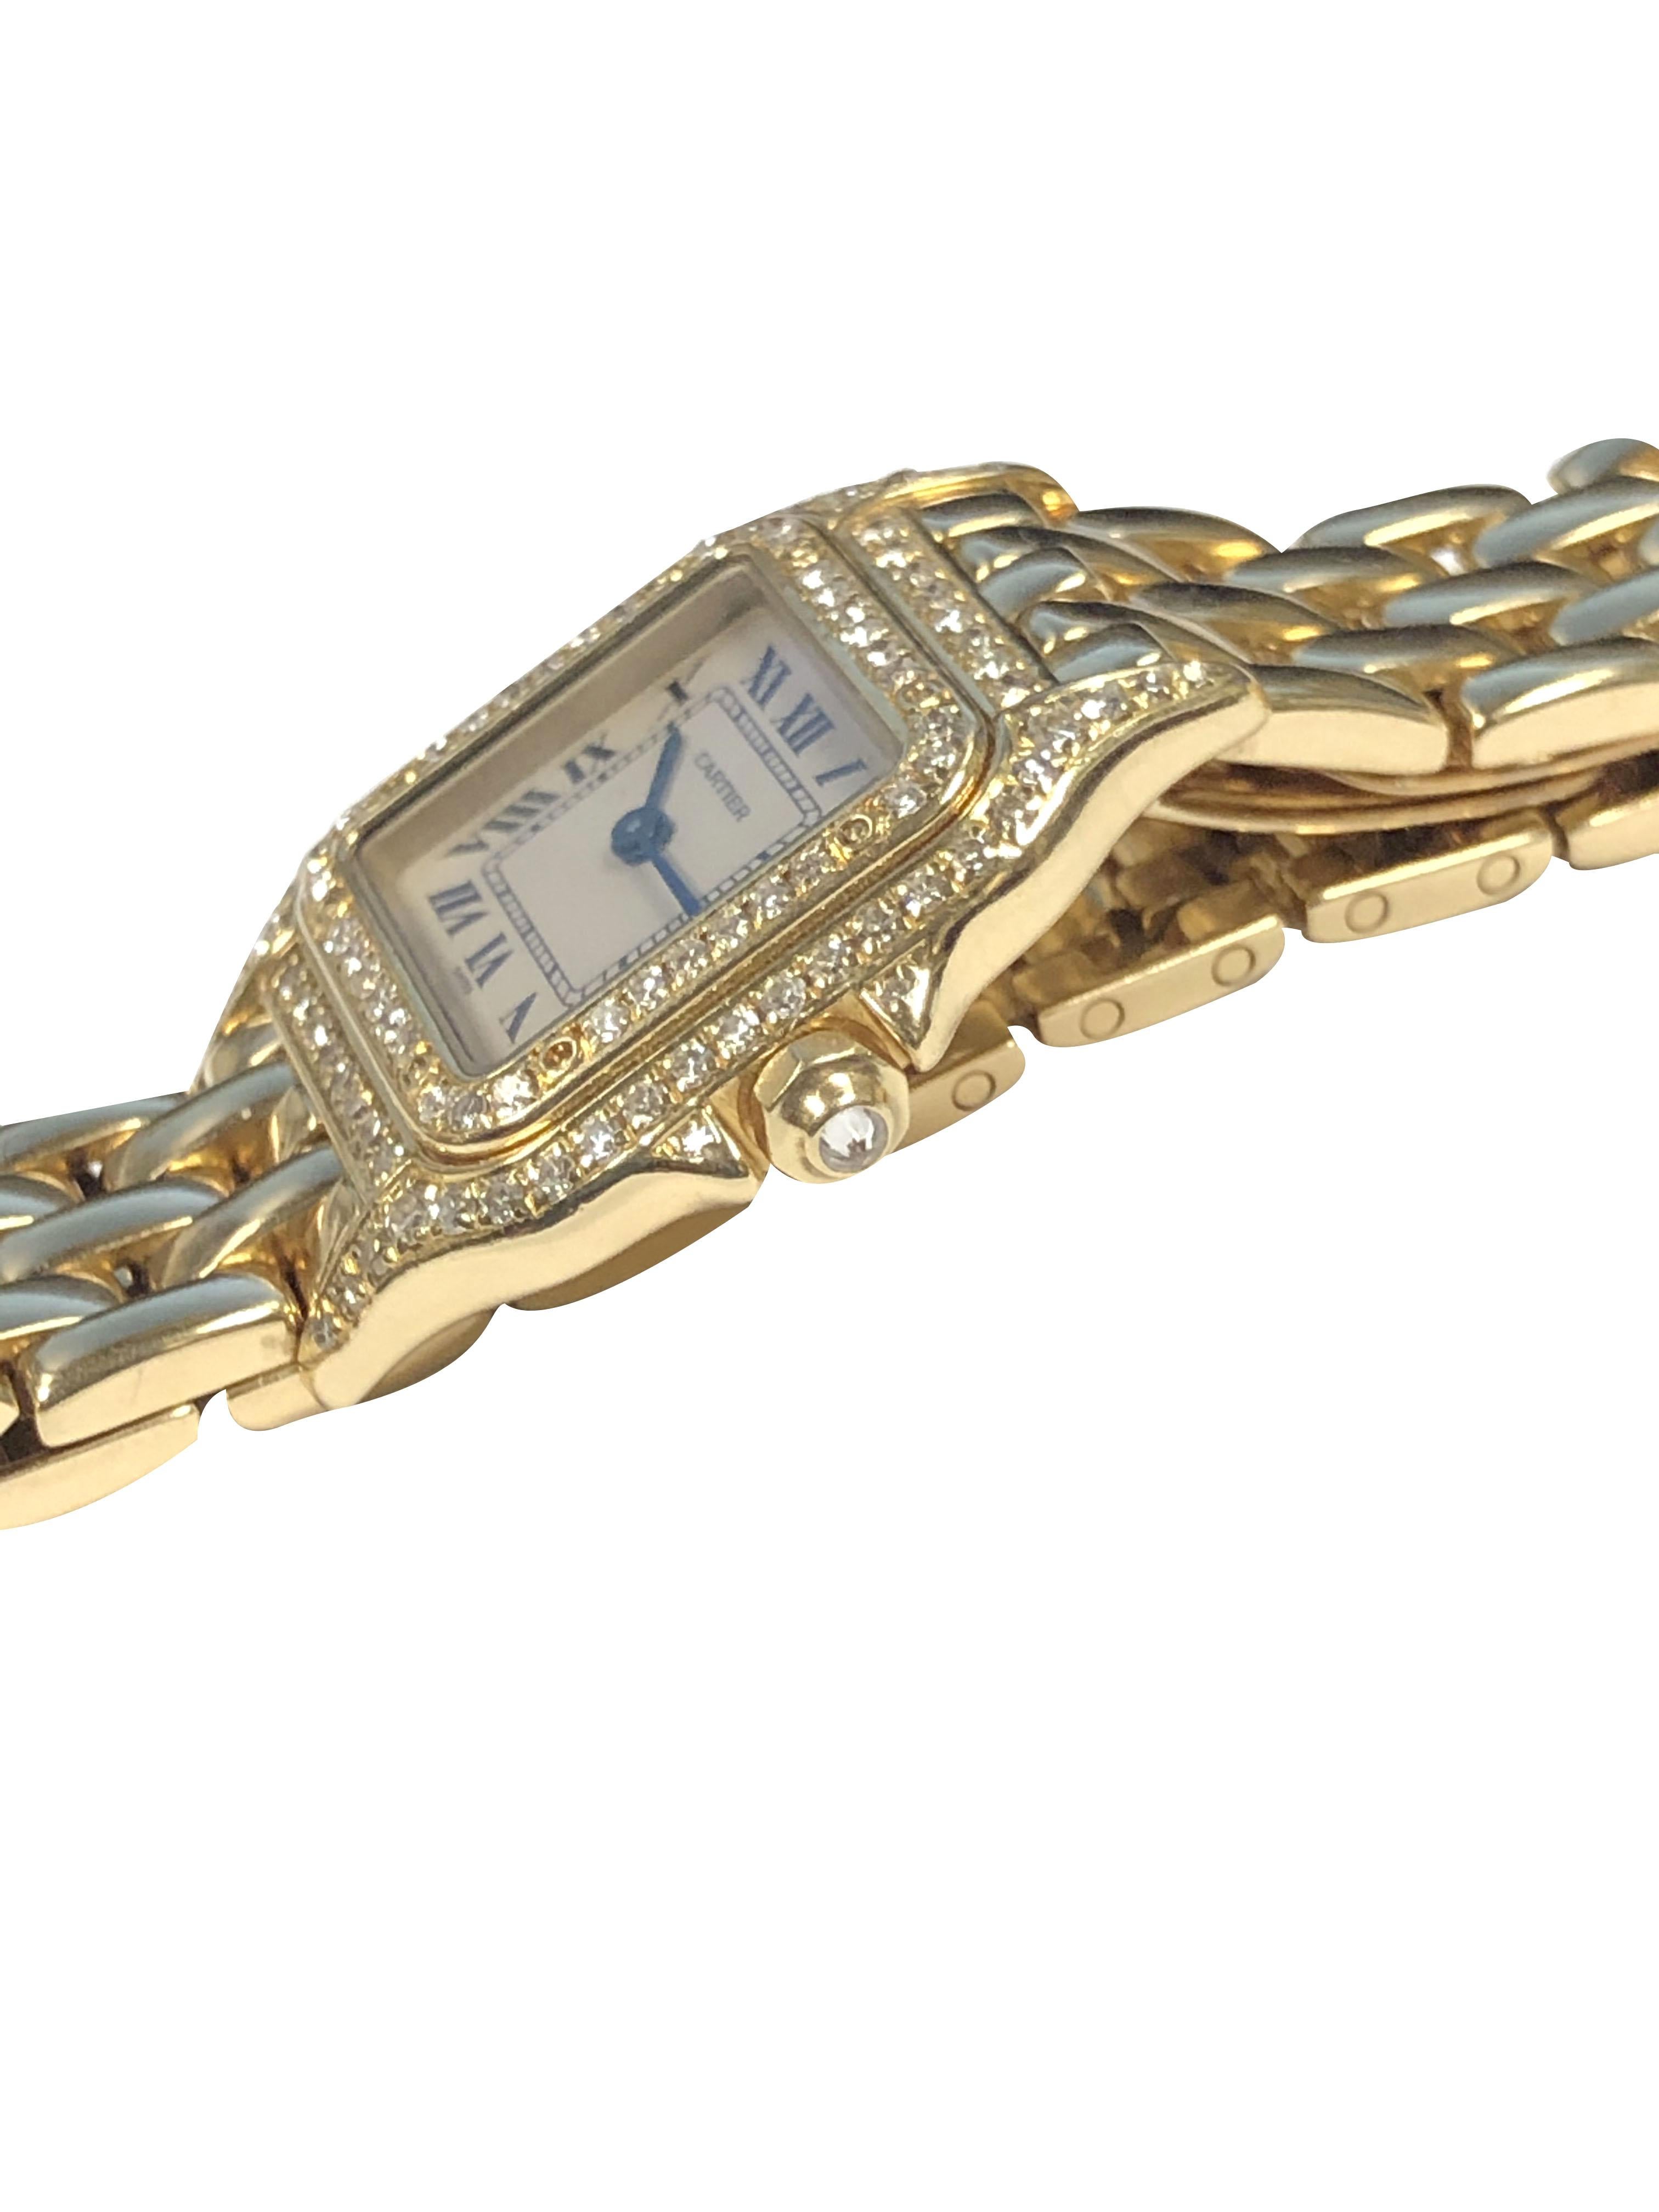 Circa 2000 Cartier Panther Collection ladies Bracelet Wrist watch, 30 X 22 M.M. 18K yellow Gold 2 Piece water resistant case, With Cartier factory set Double Row of Diamonds on the Bezel, case and top of lugs. Diamond set crown, Quartz movement,